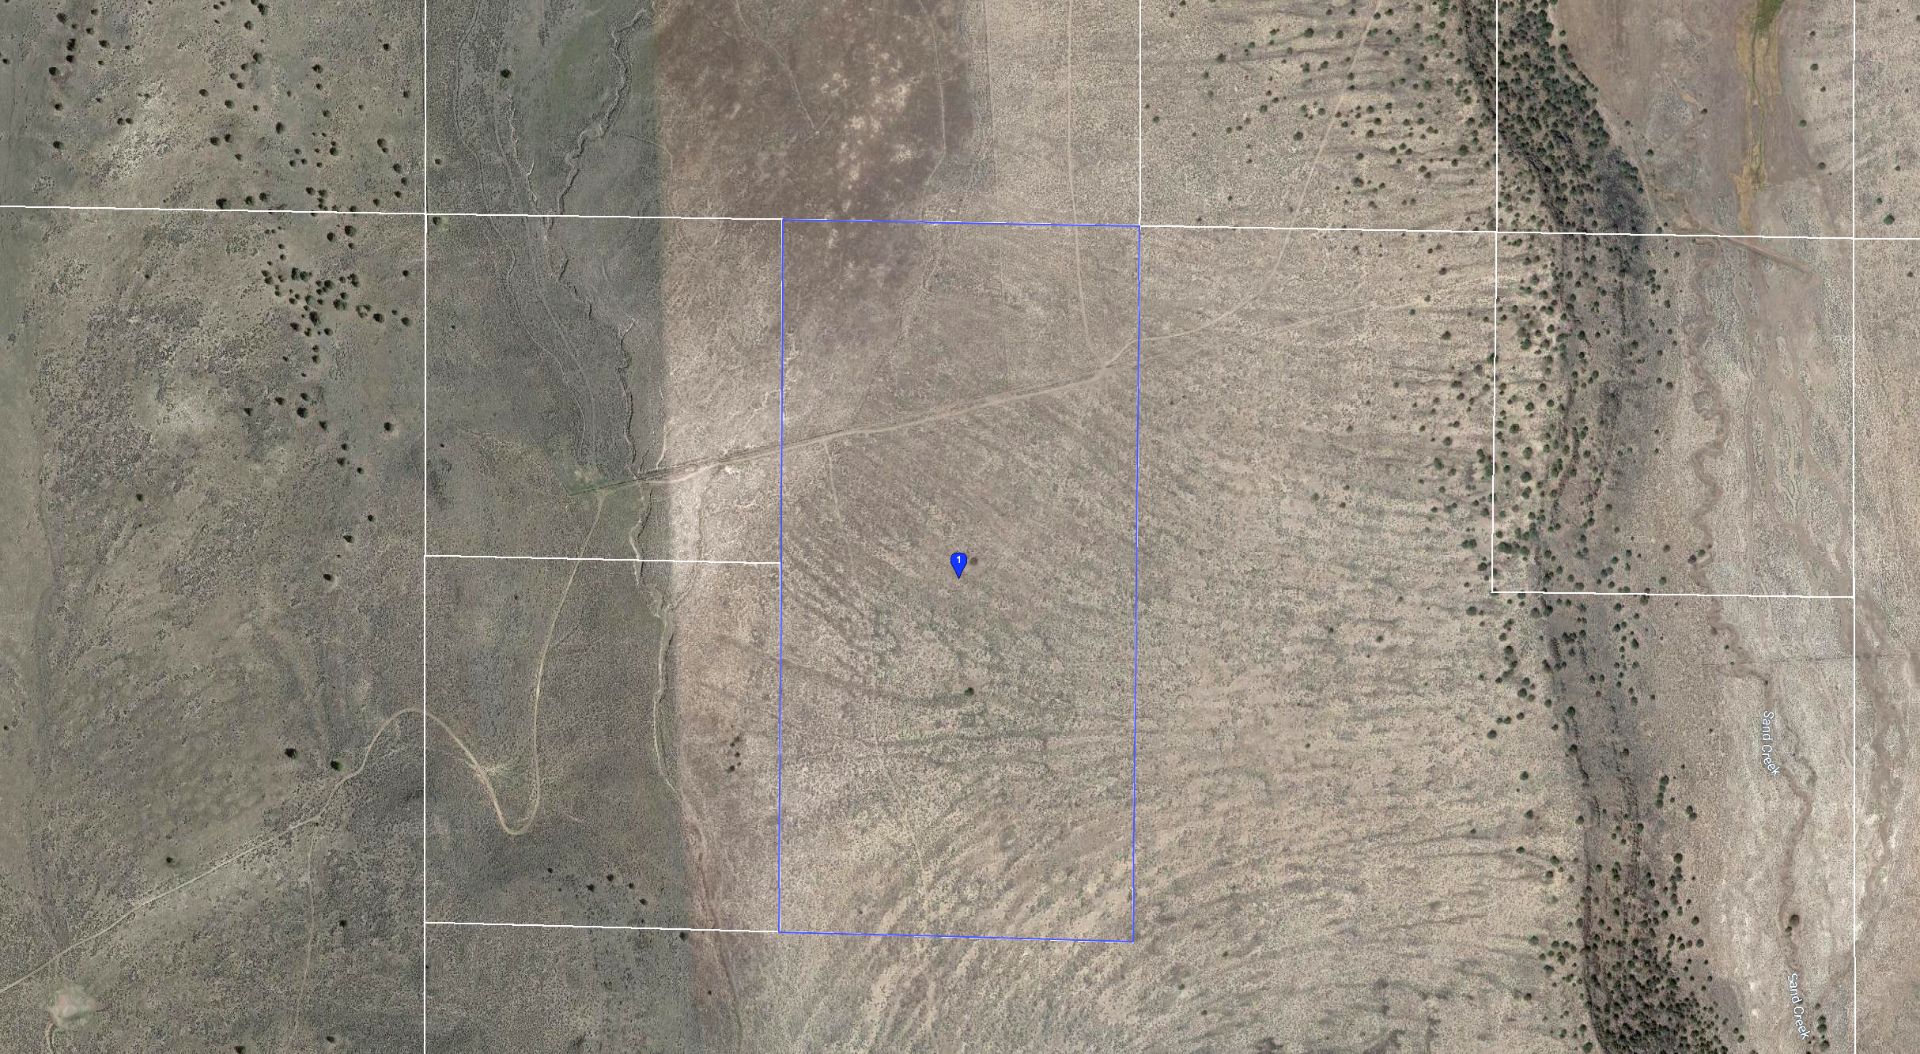 80 Acres in Northern California Near the Nevada Border! - Image 2 of 15